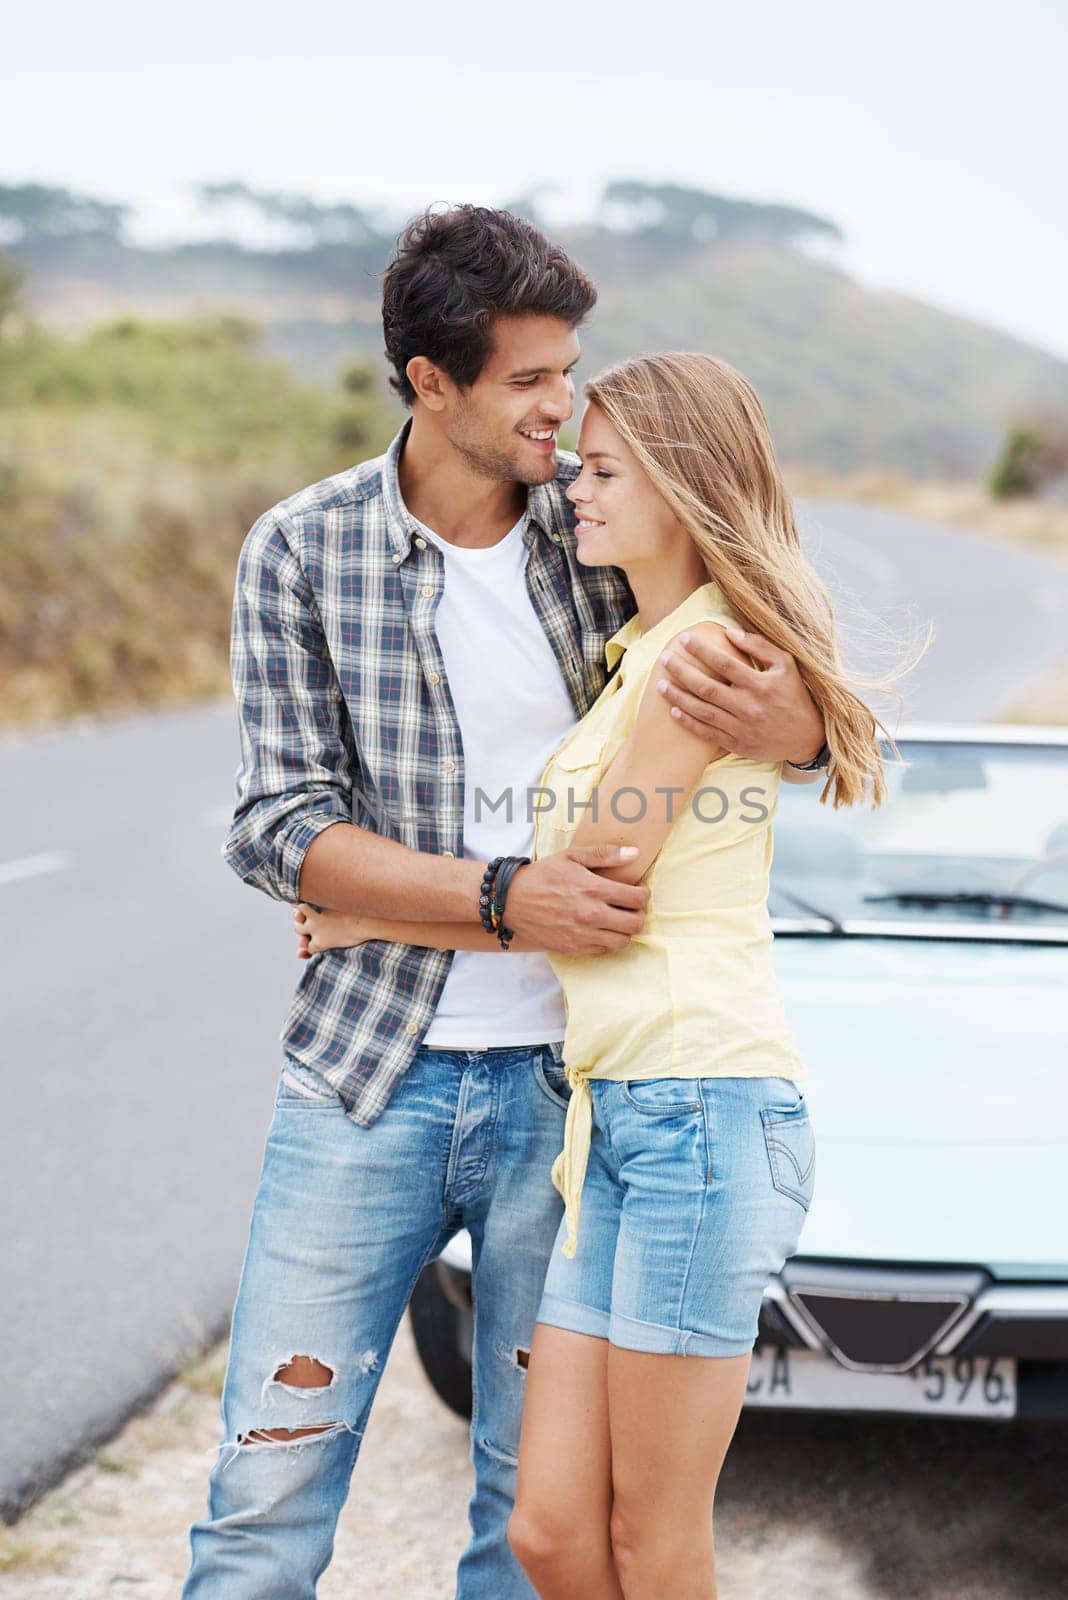 Enjoying their relationship. A romantic young couple standing alongside their convertible while on a roadtrip